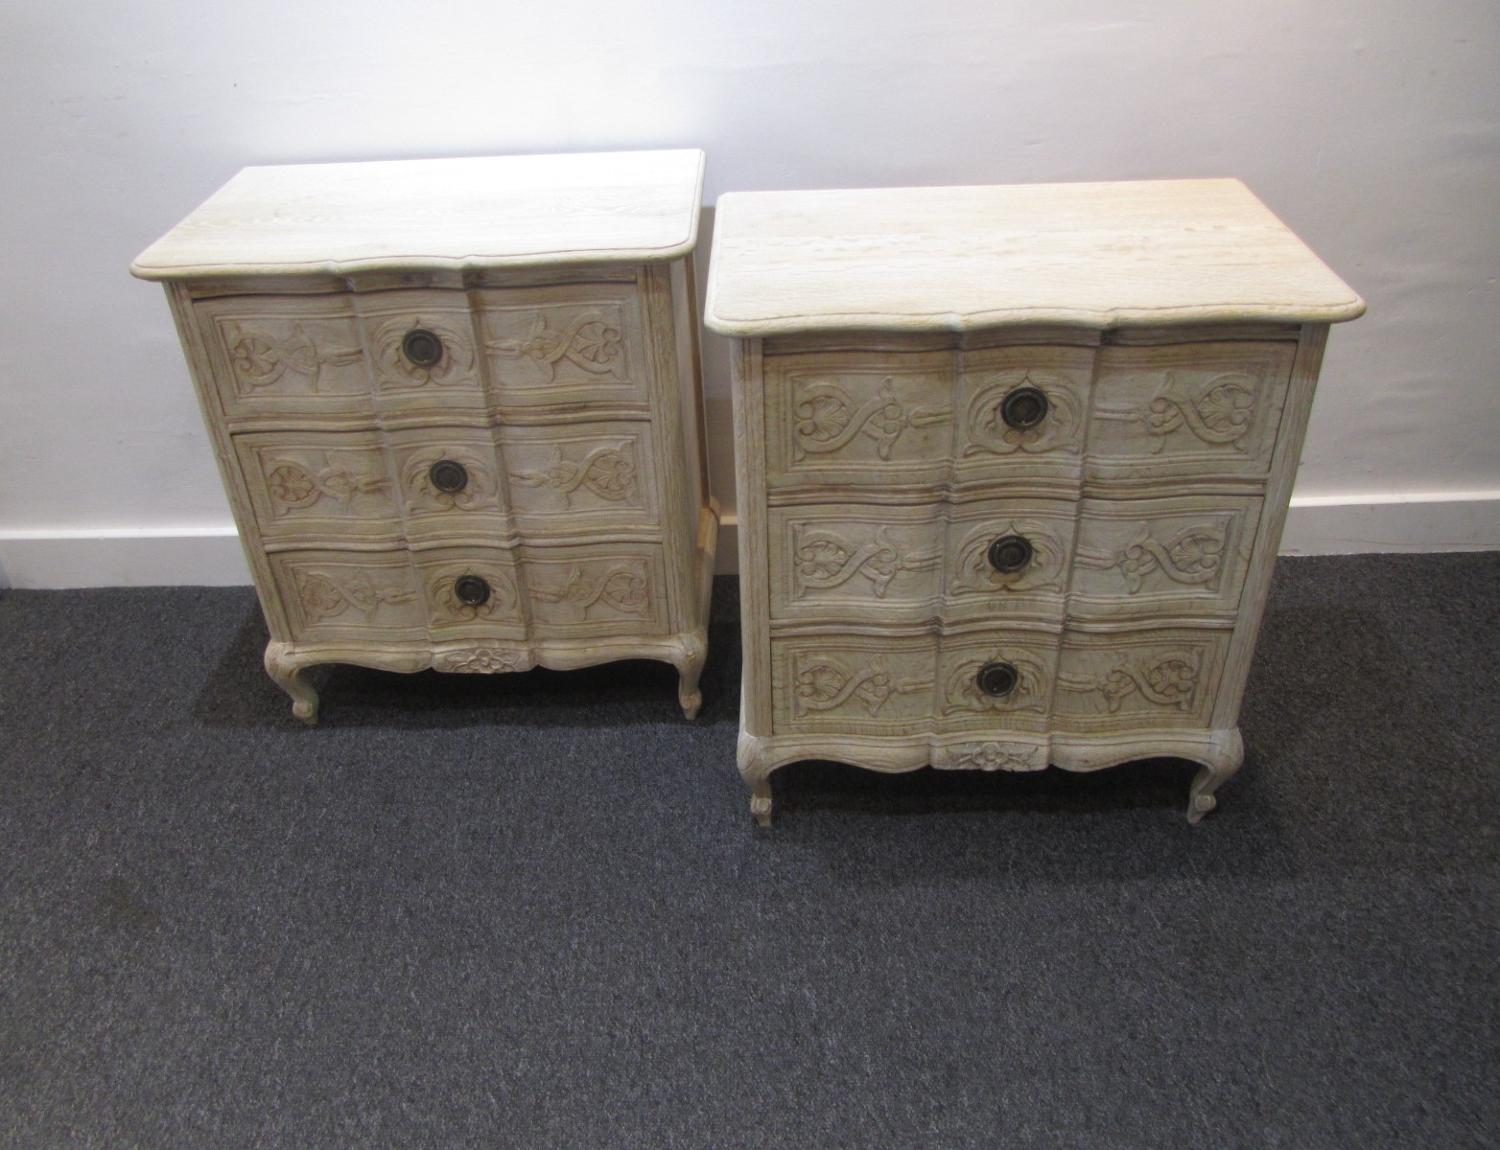 A pair of petite serpentine commodes